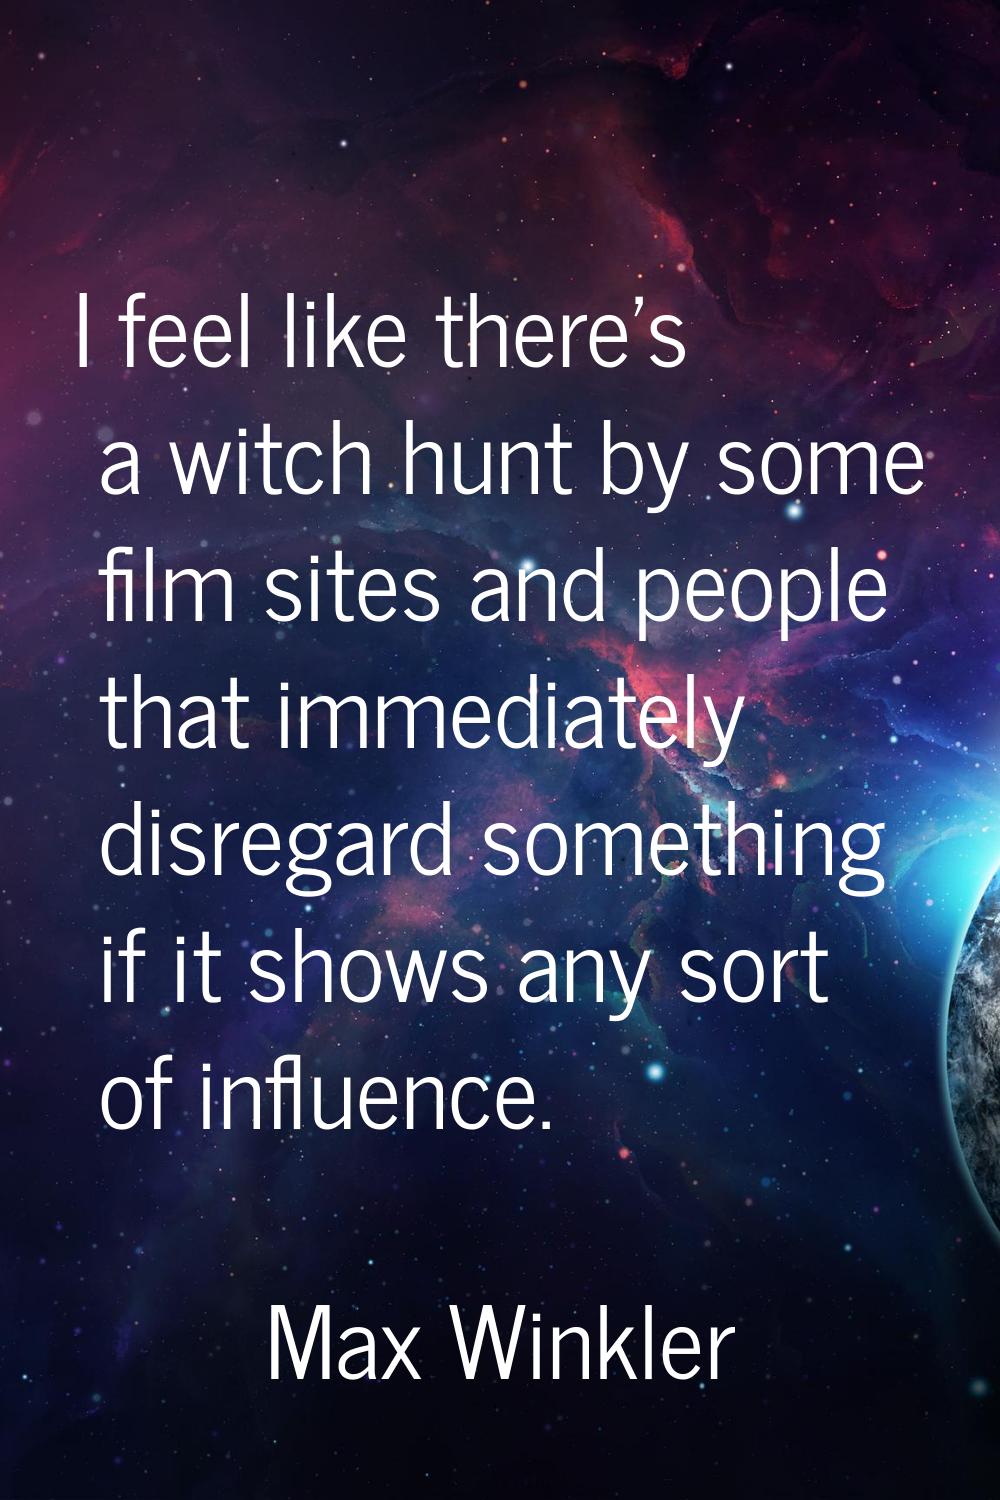 I feel like there's a witch hunt by some film sites and people that immediately disregard something